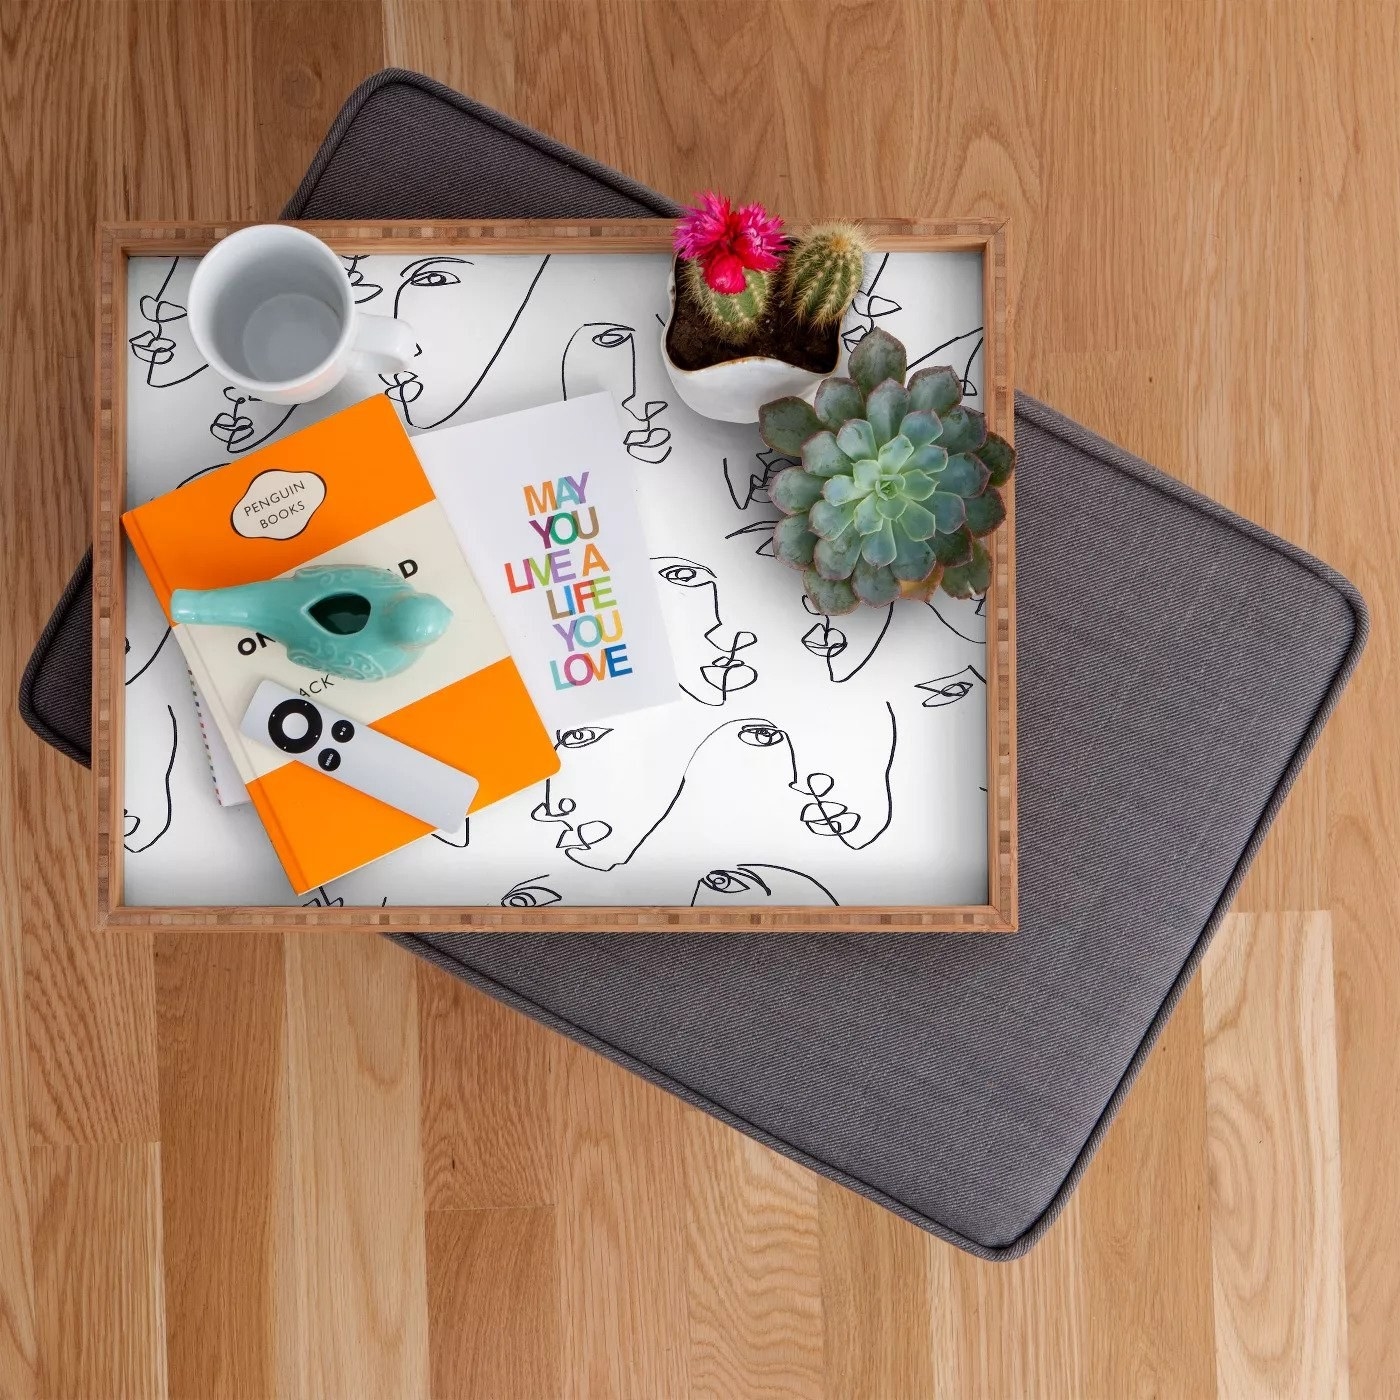 the tray with plants and other items on top of it sitting on gray pad on wood floor